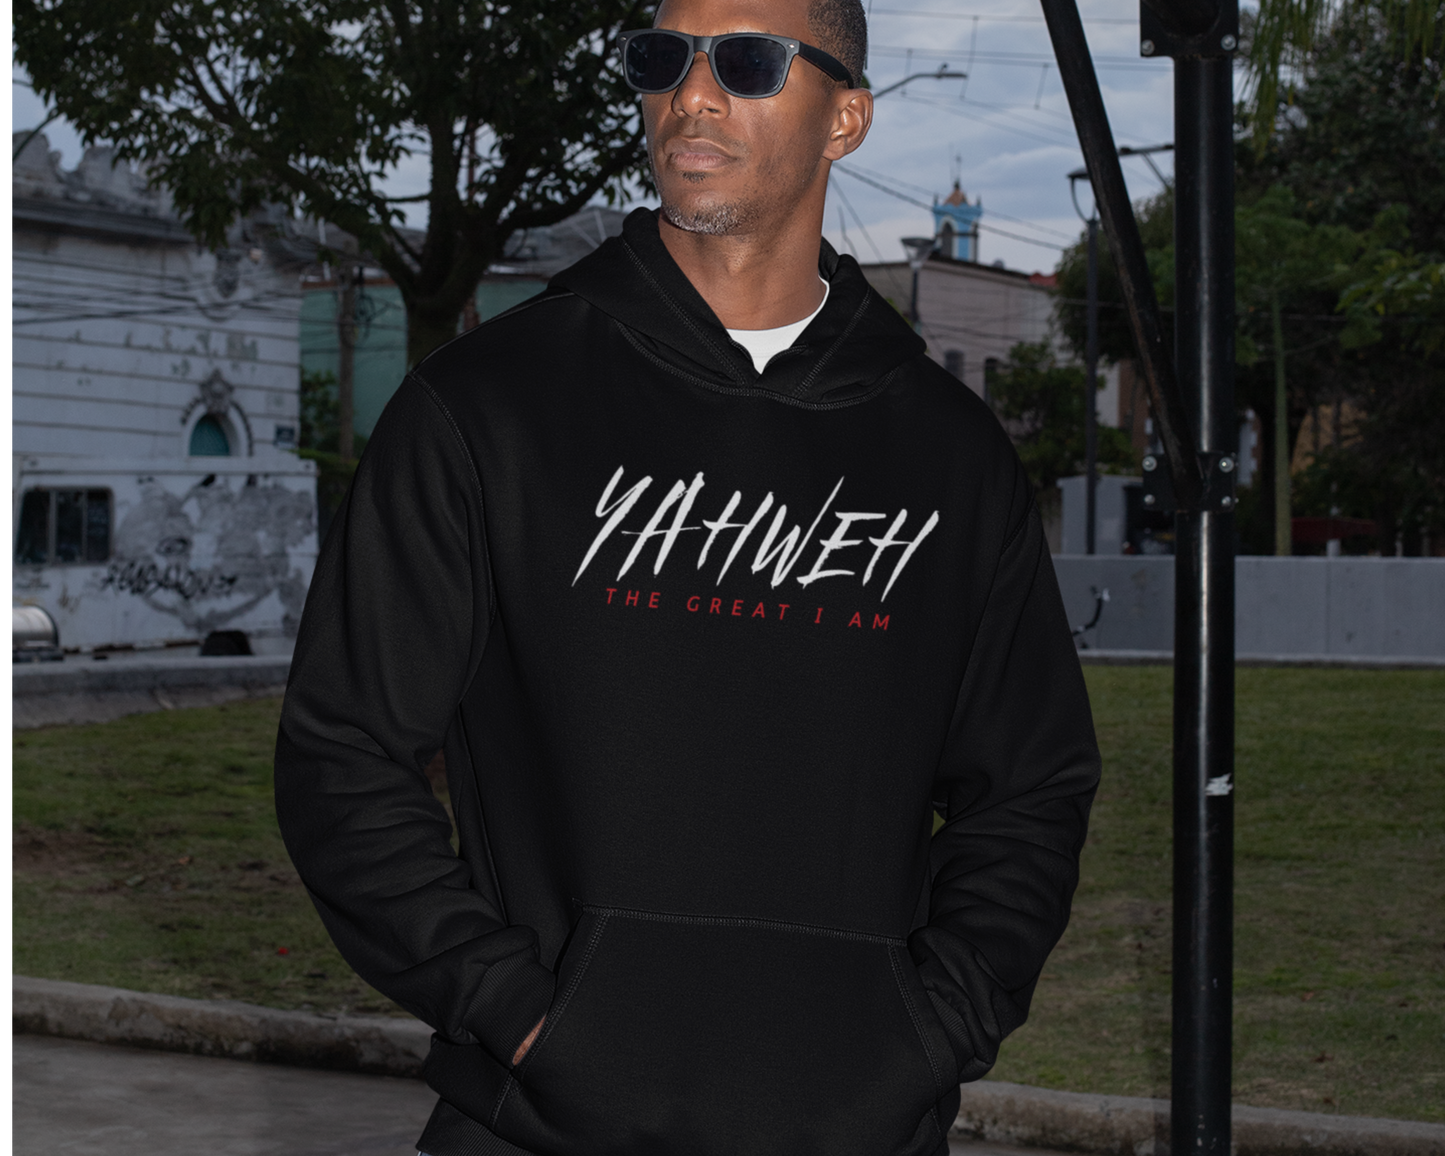 Yahweh The Great I am Men's Hoodie